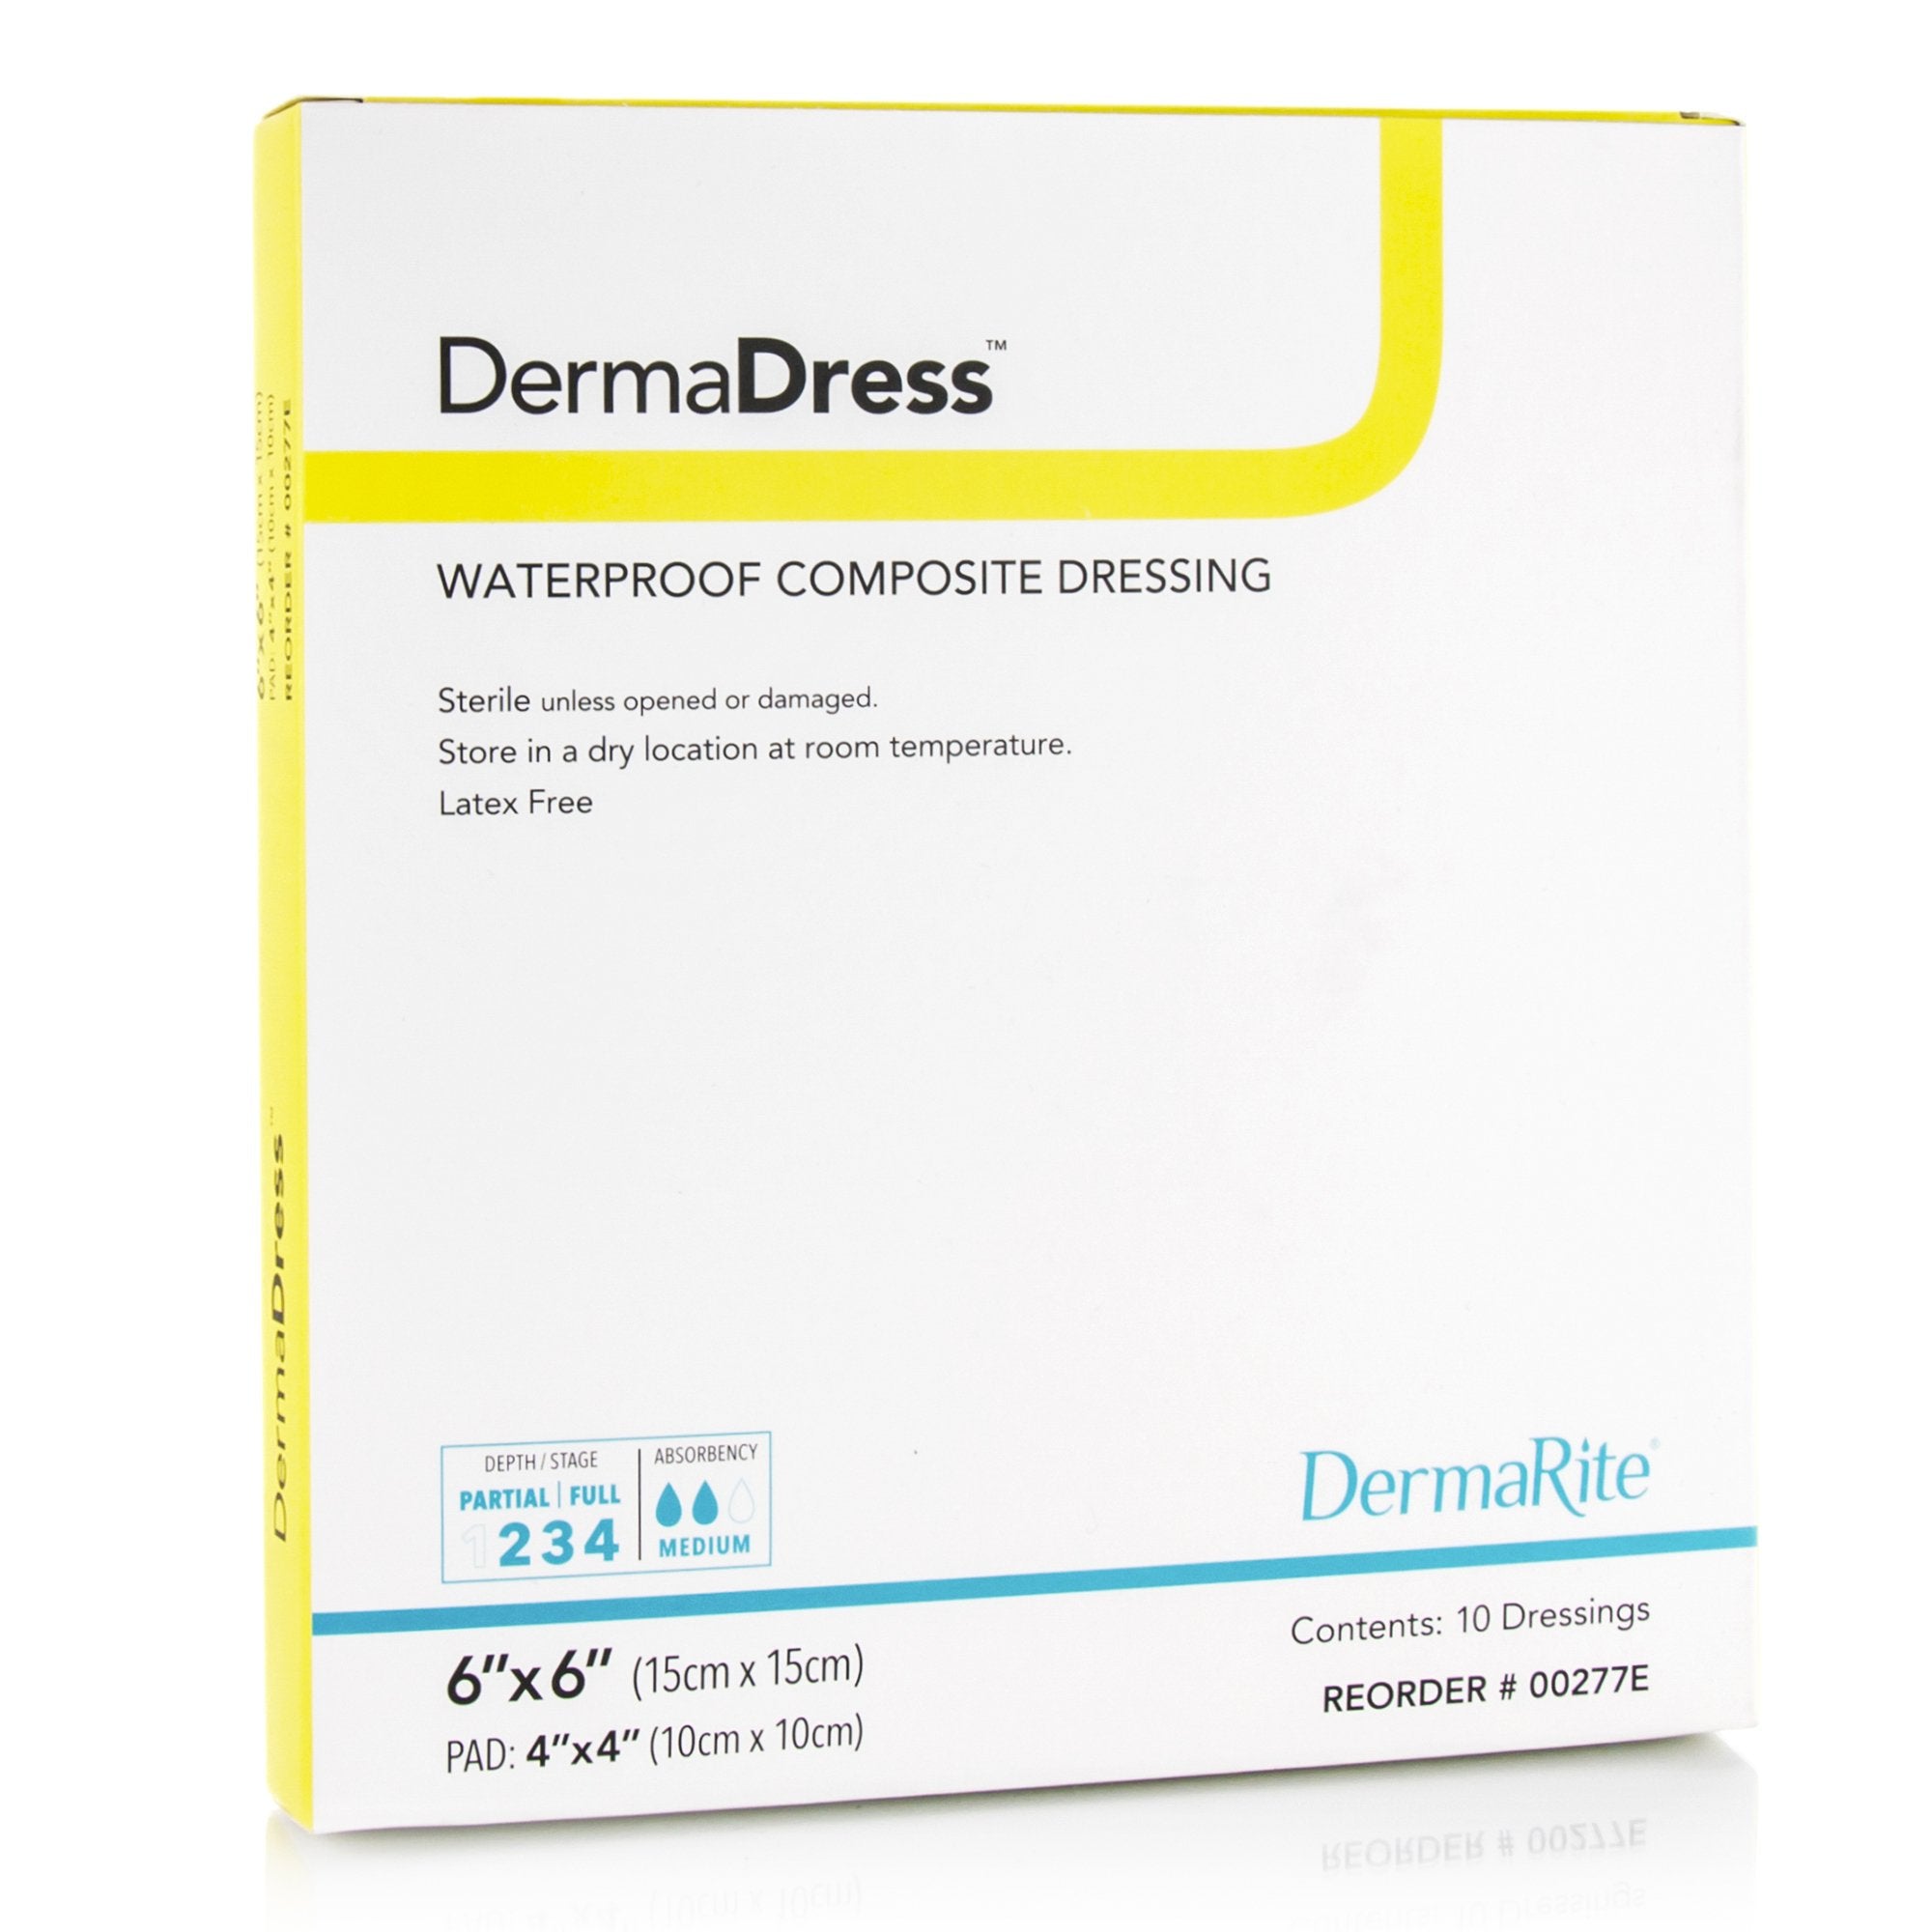 Composite Dressing DermaDress™ 6 X 6 Inch Square Sterile Waterproof Film Backing